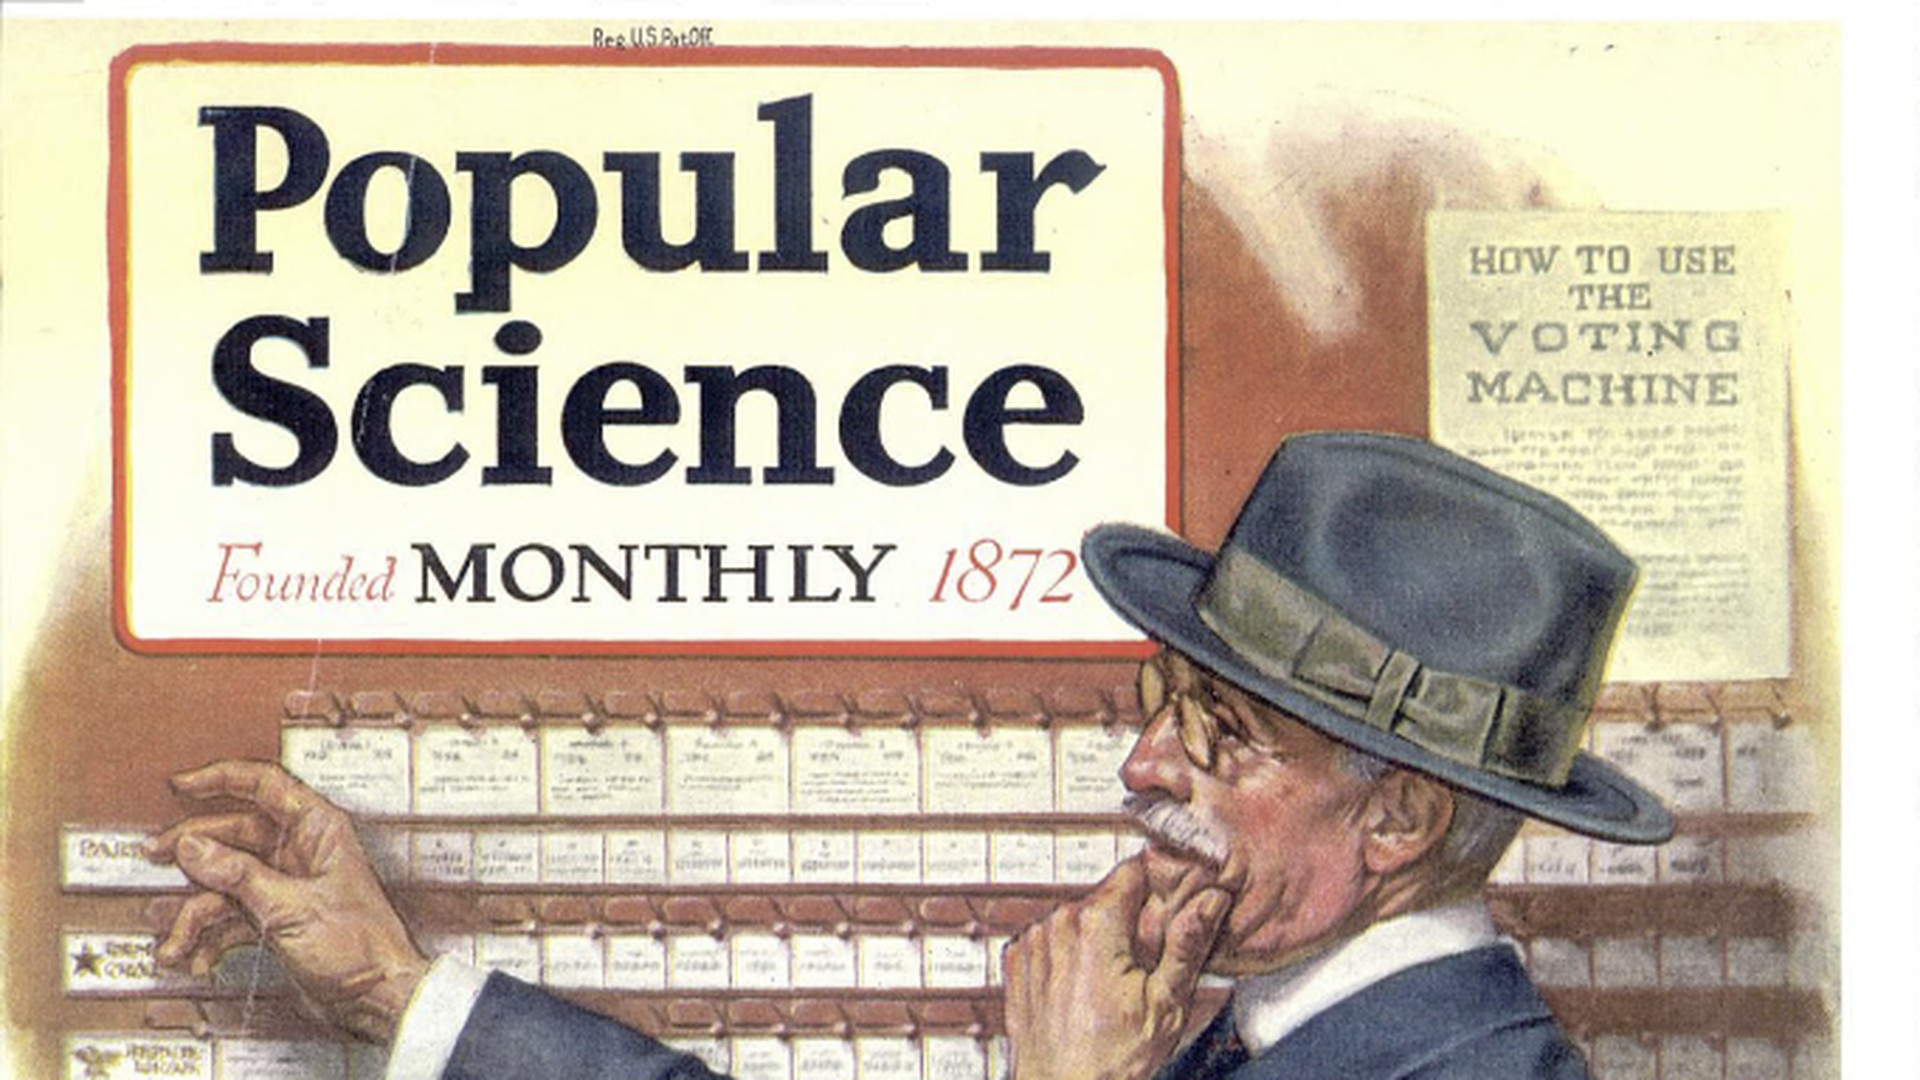 after 151 years, popular science will no longer offer a magazine